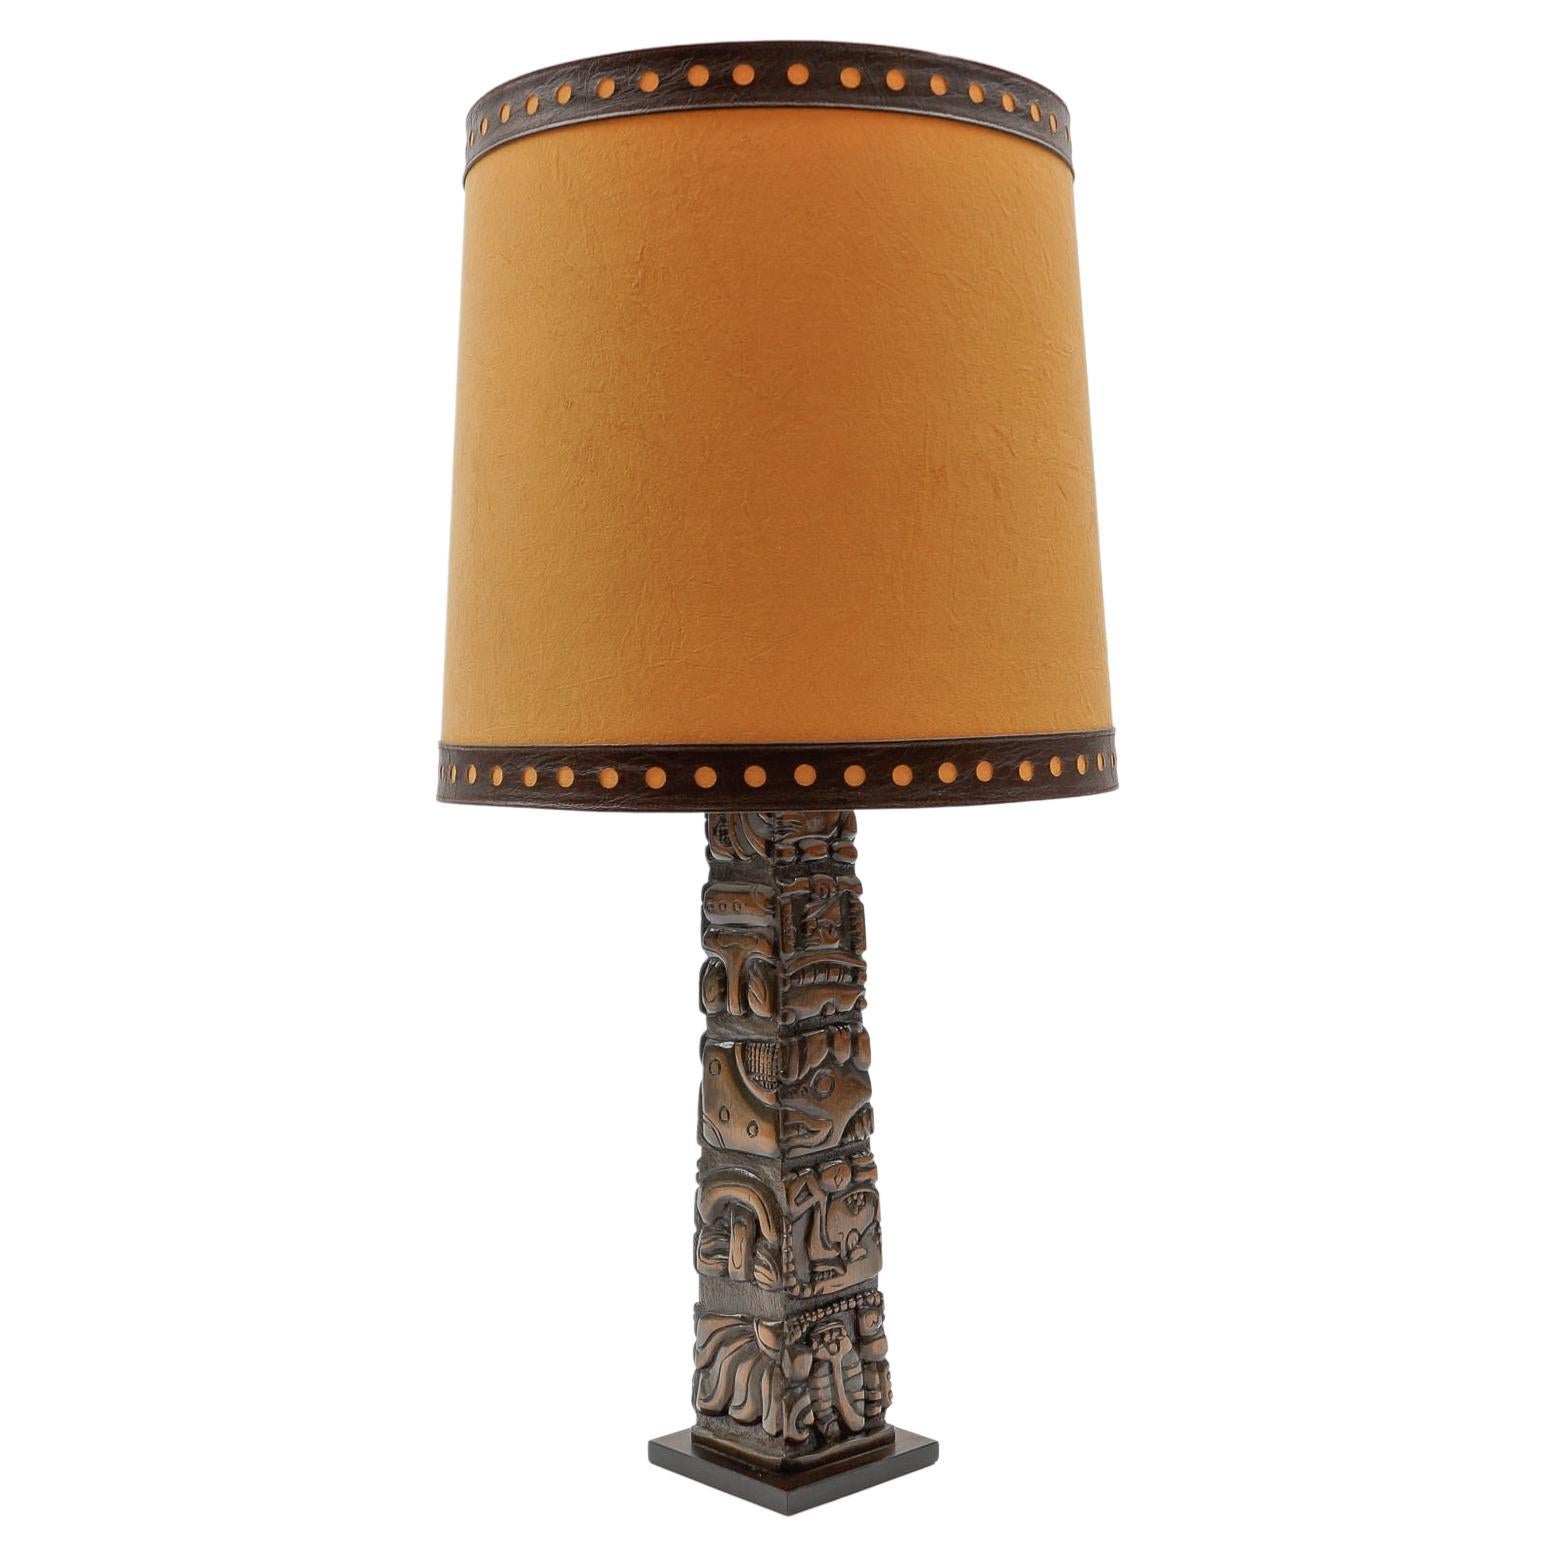 Hand Carved Wooden Mayan Totem Table Lamp by Temde Honduras, Switzerland 1960s For Sale